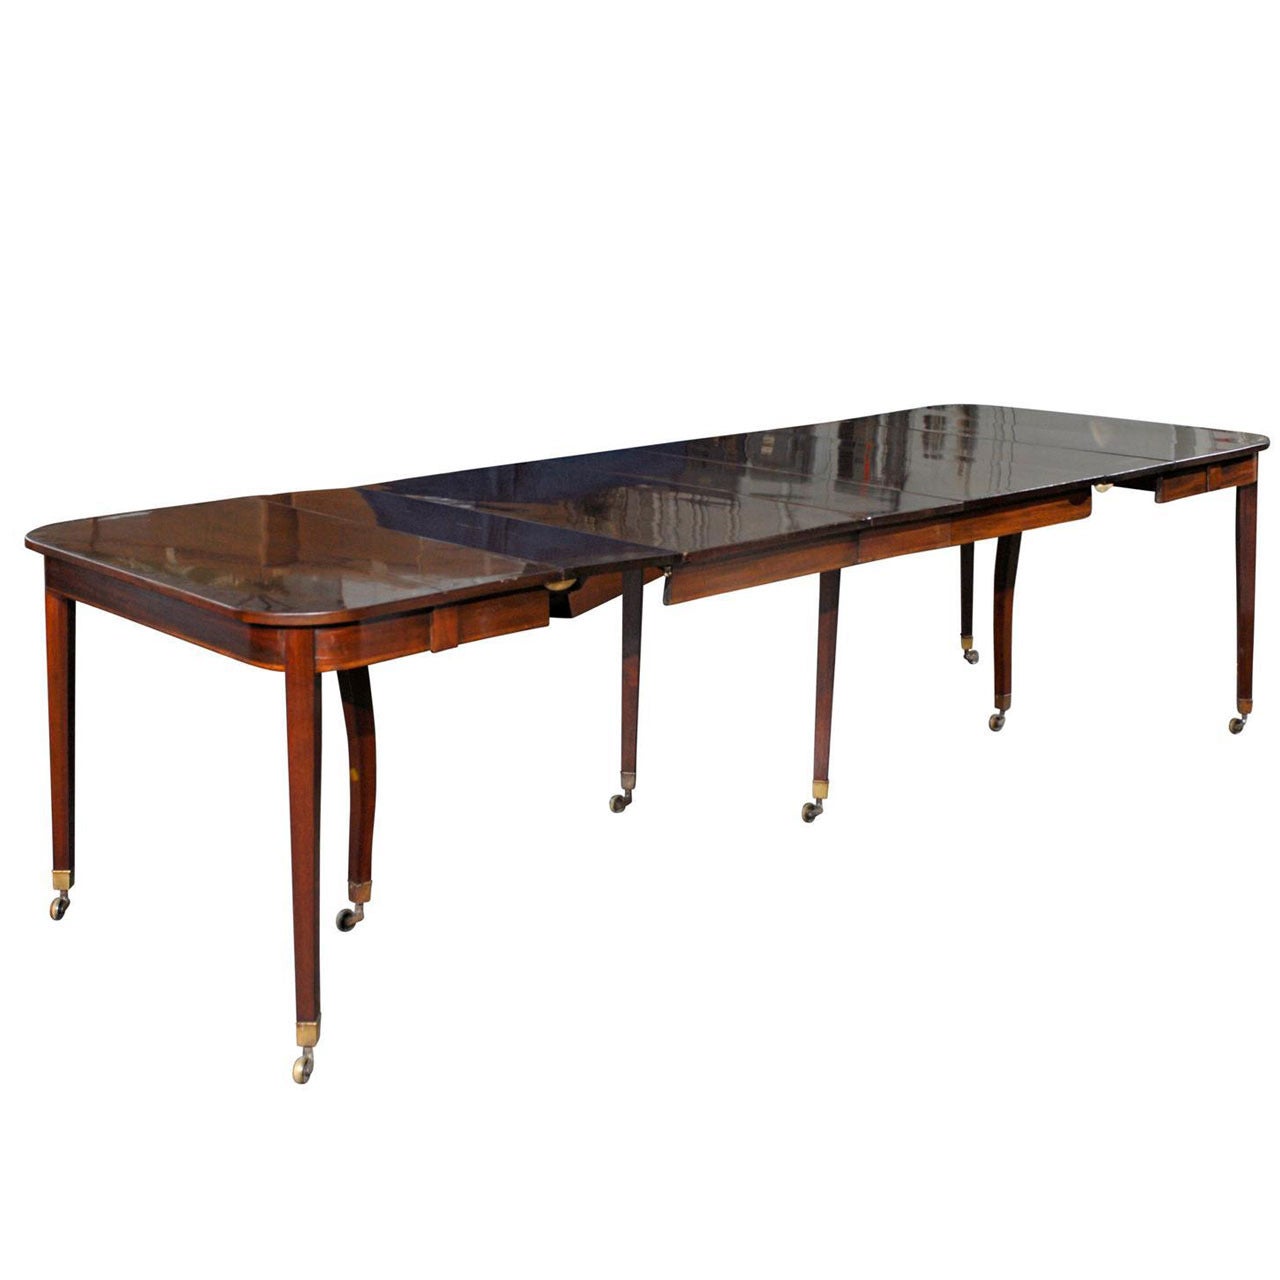 19th Century George III, Inlaid Mahogany Extension Dining Table with Five Leaves